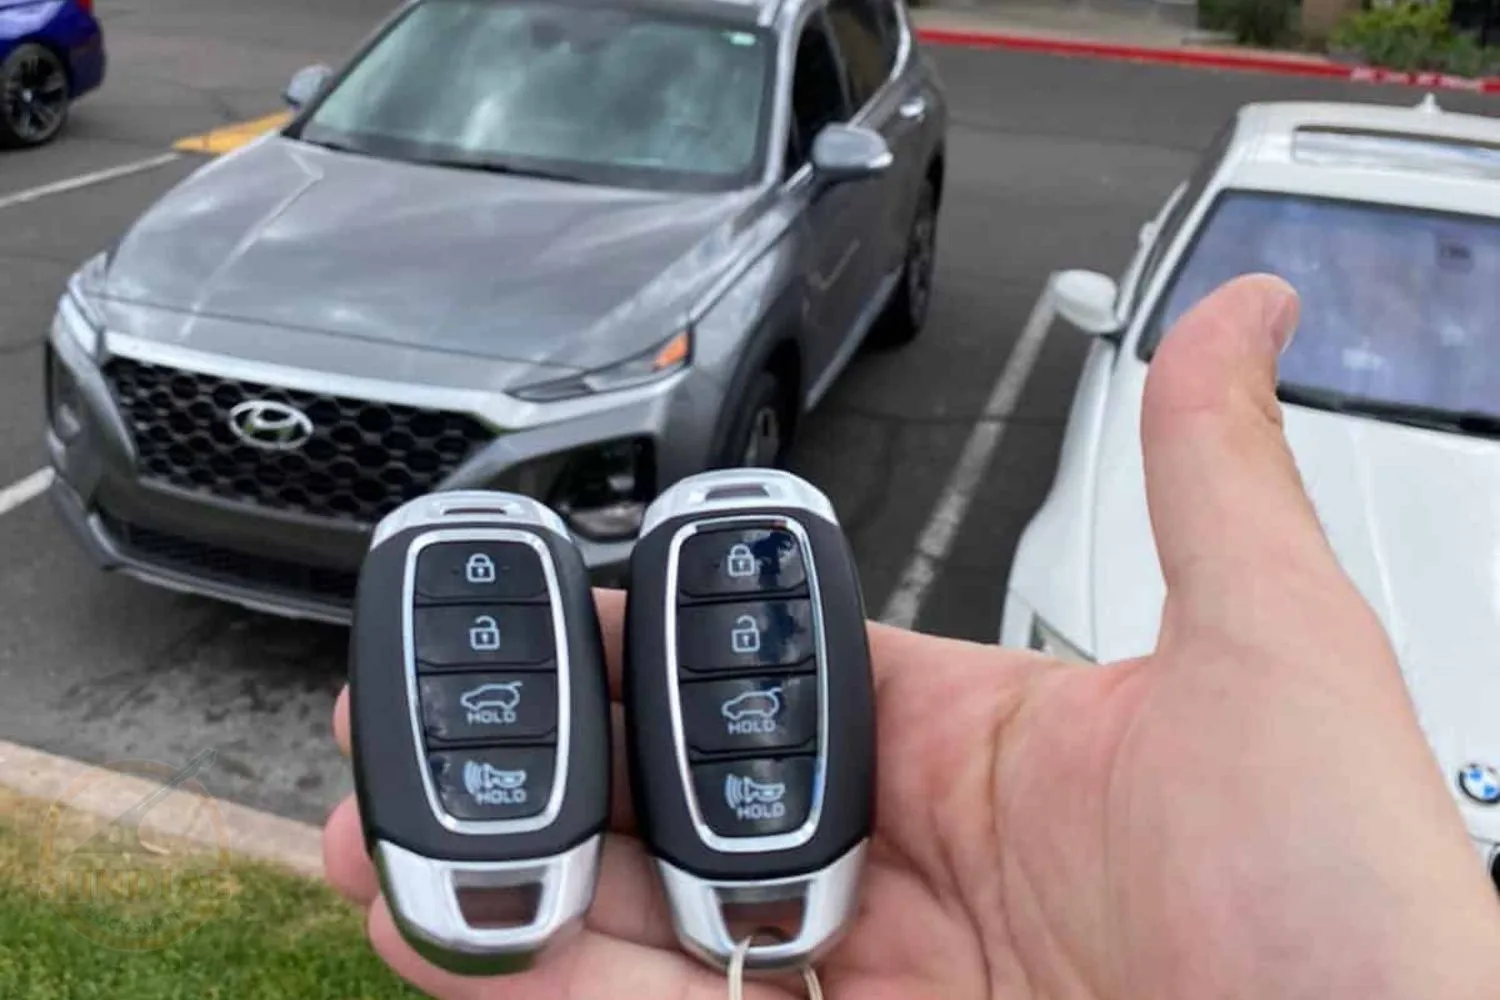 A person's hand holding two Hyundai car key fobs in a parking lot, with a grey Hyundai SUV in the background.